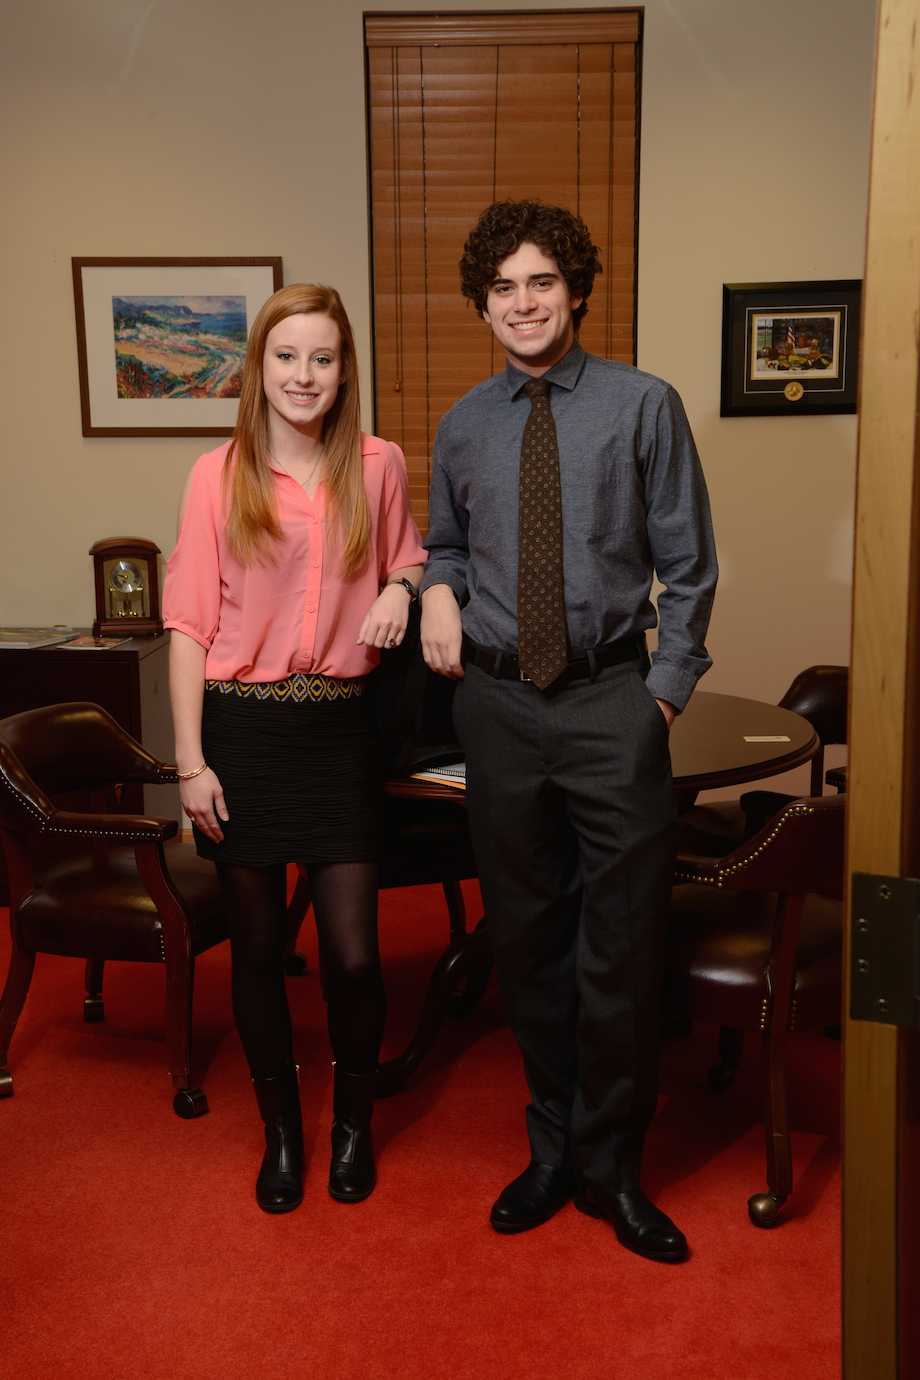 Most Likely to Succeed: Parker McGowan and Claire McDowell  (photo courtesy of Mr. Hubert Worley)